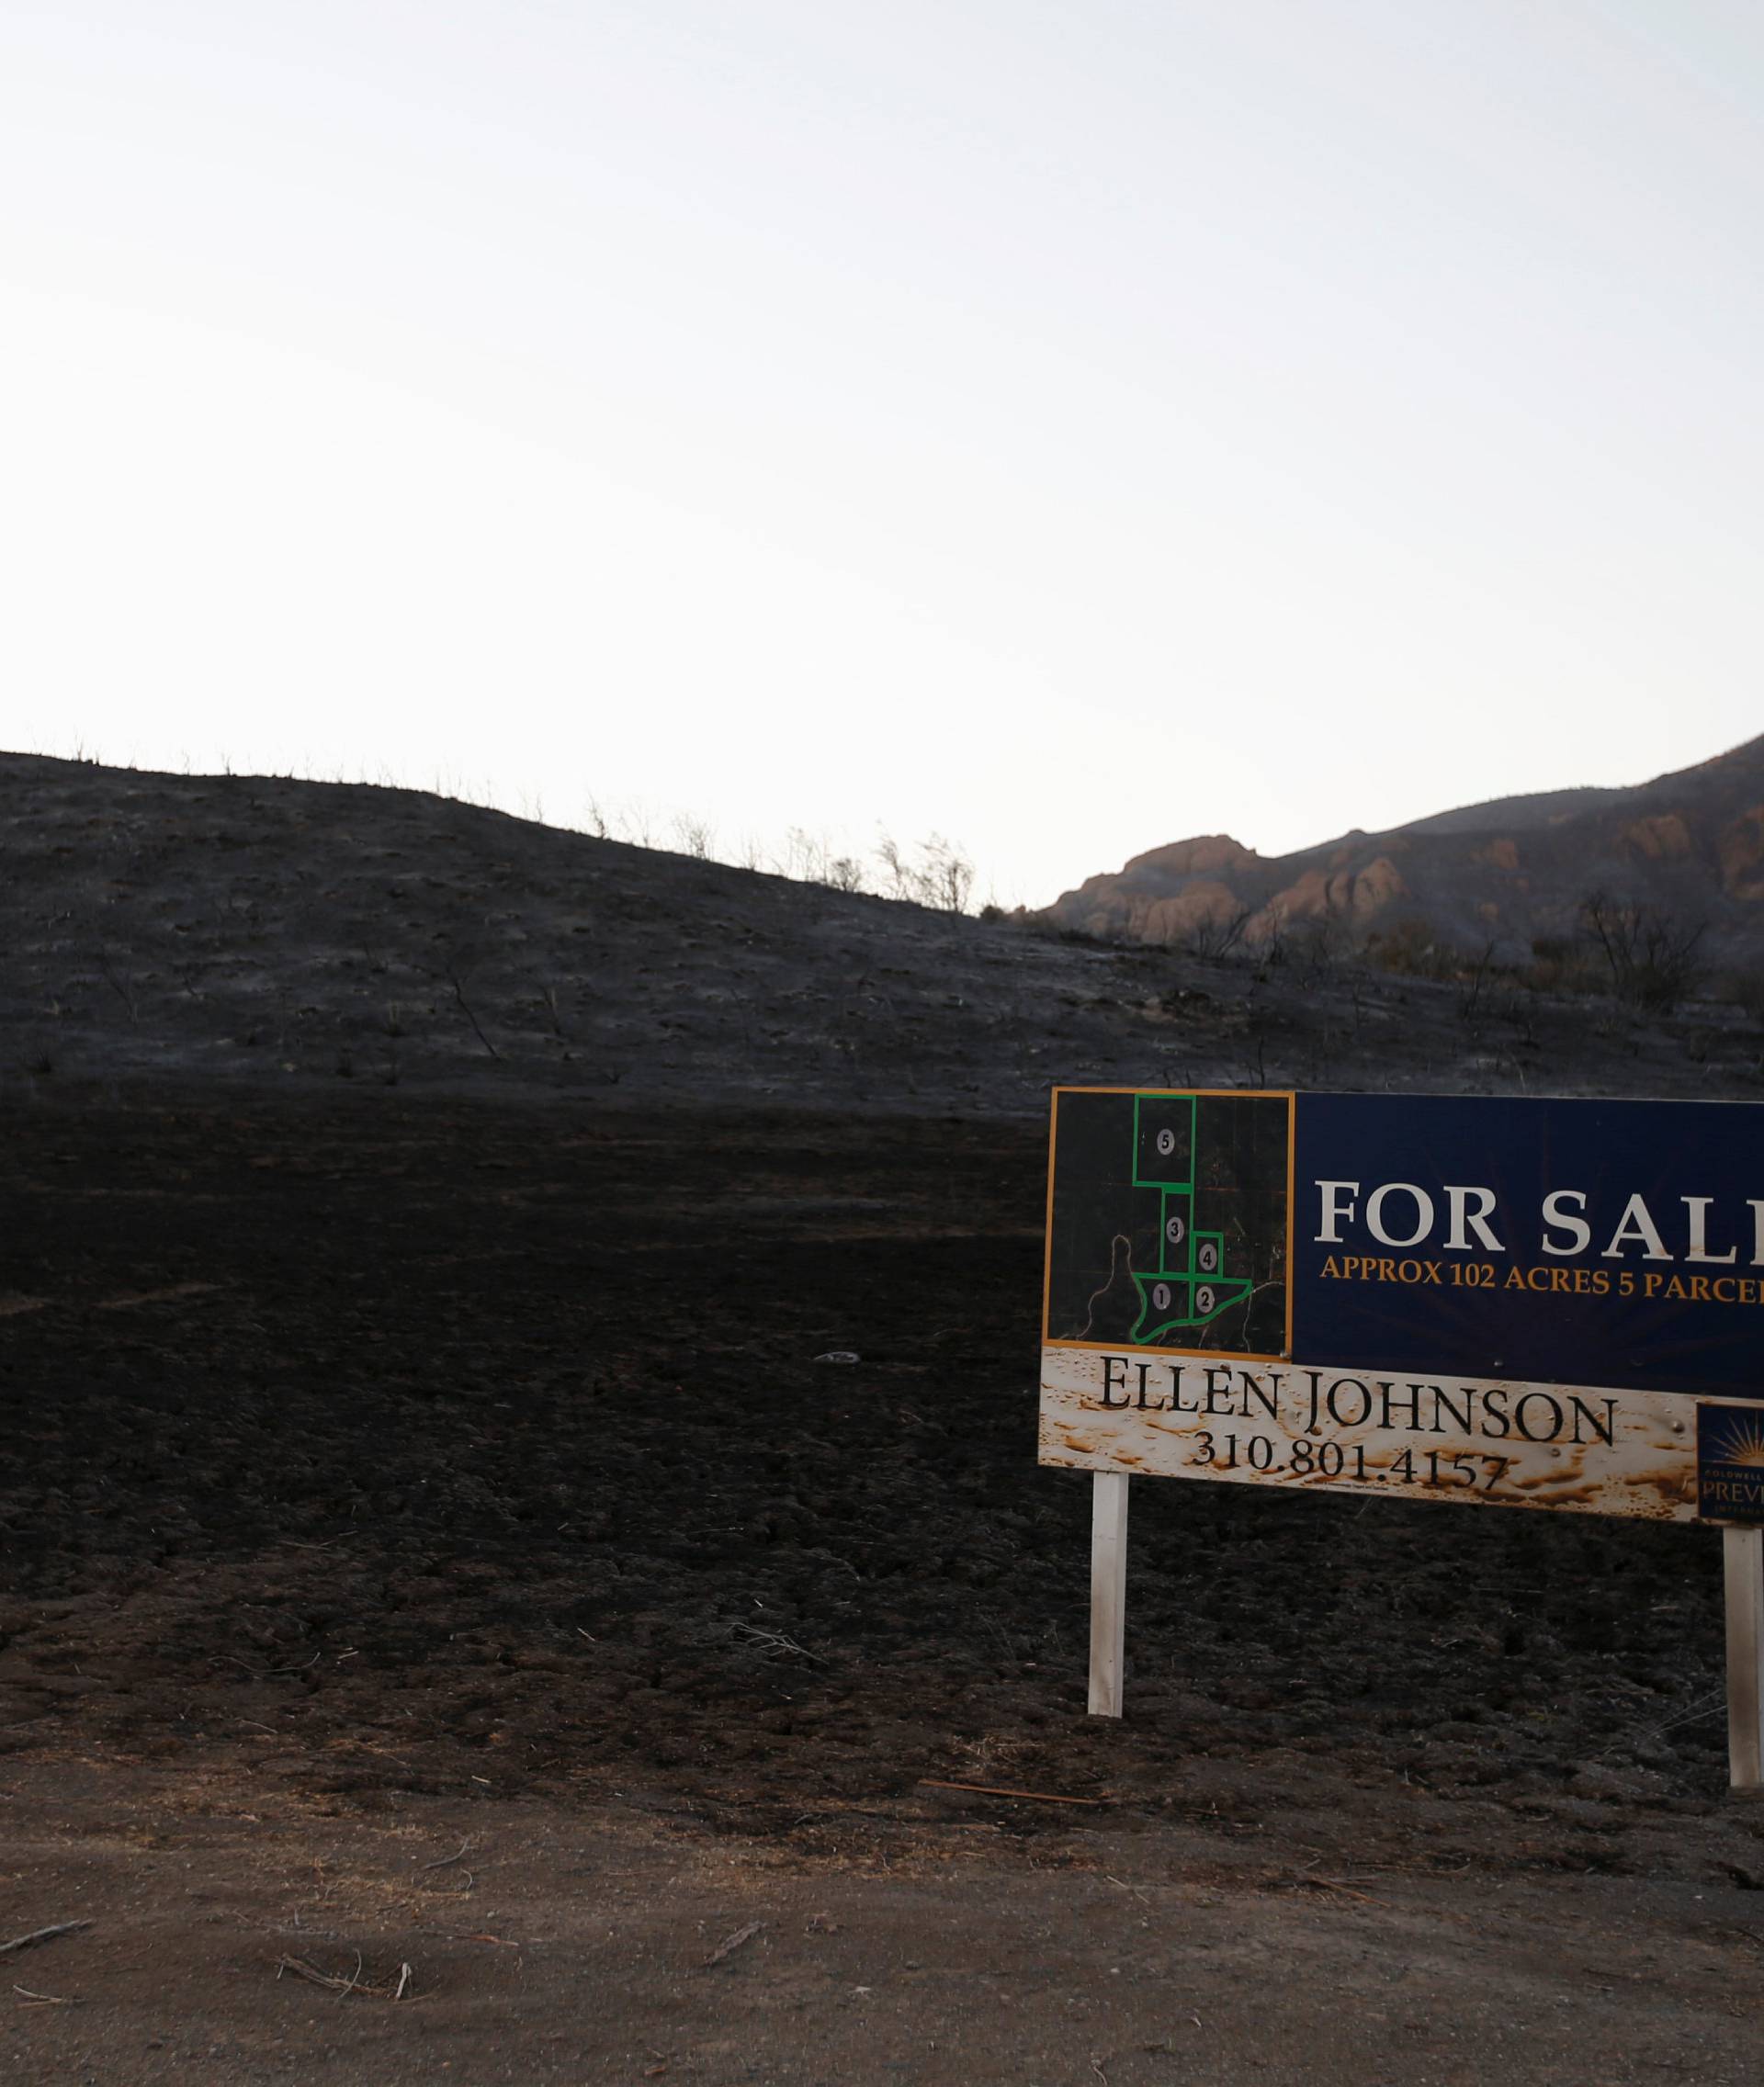 A view of land for sale in the aftermath of the Woolsey fire in Malibu, Southern California